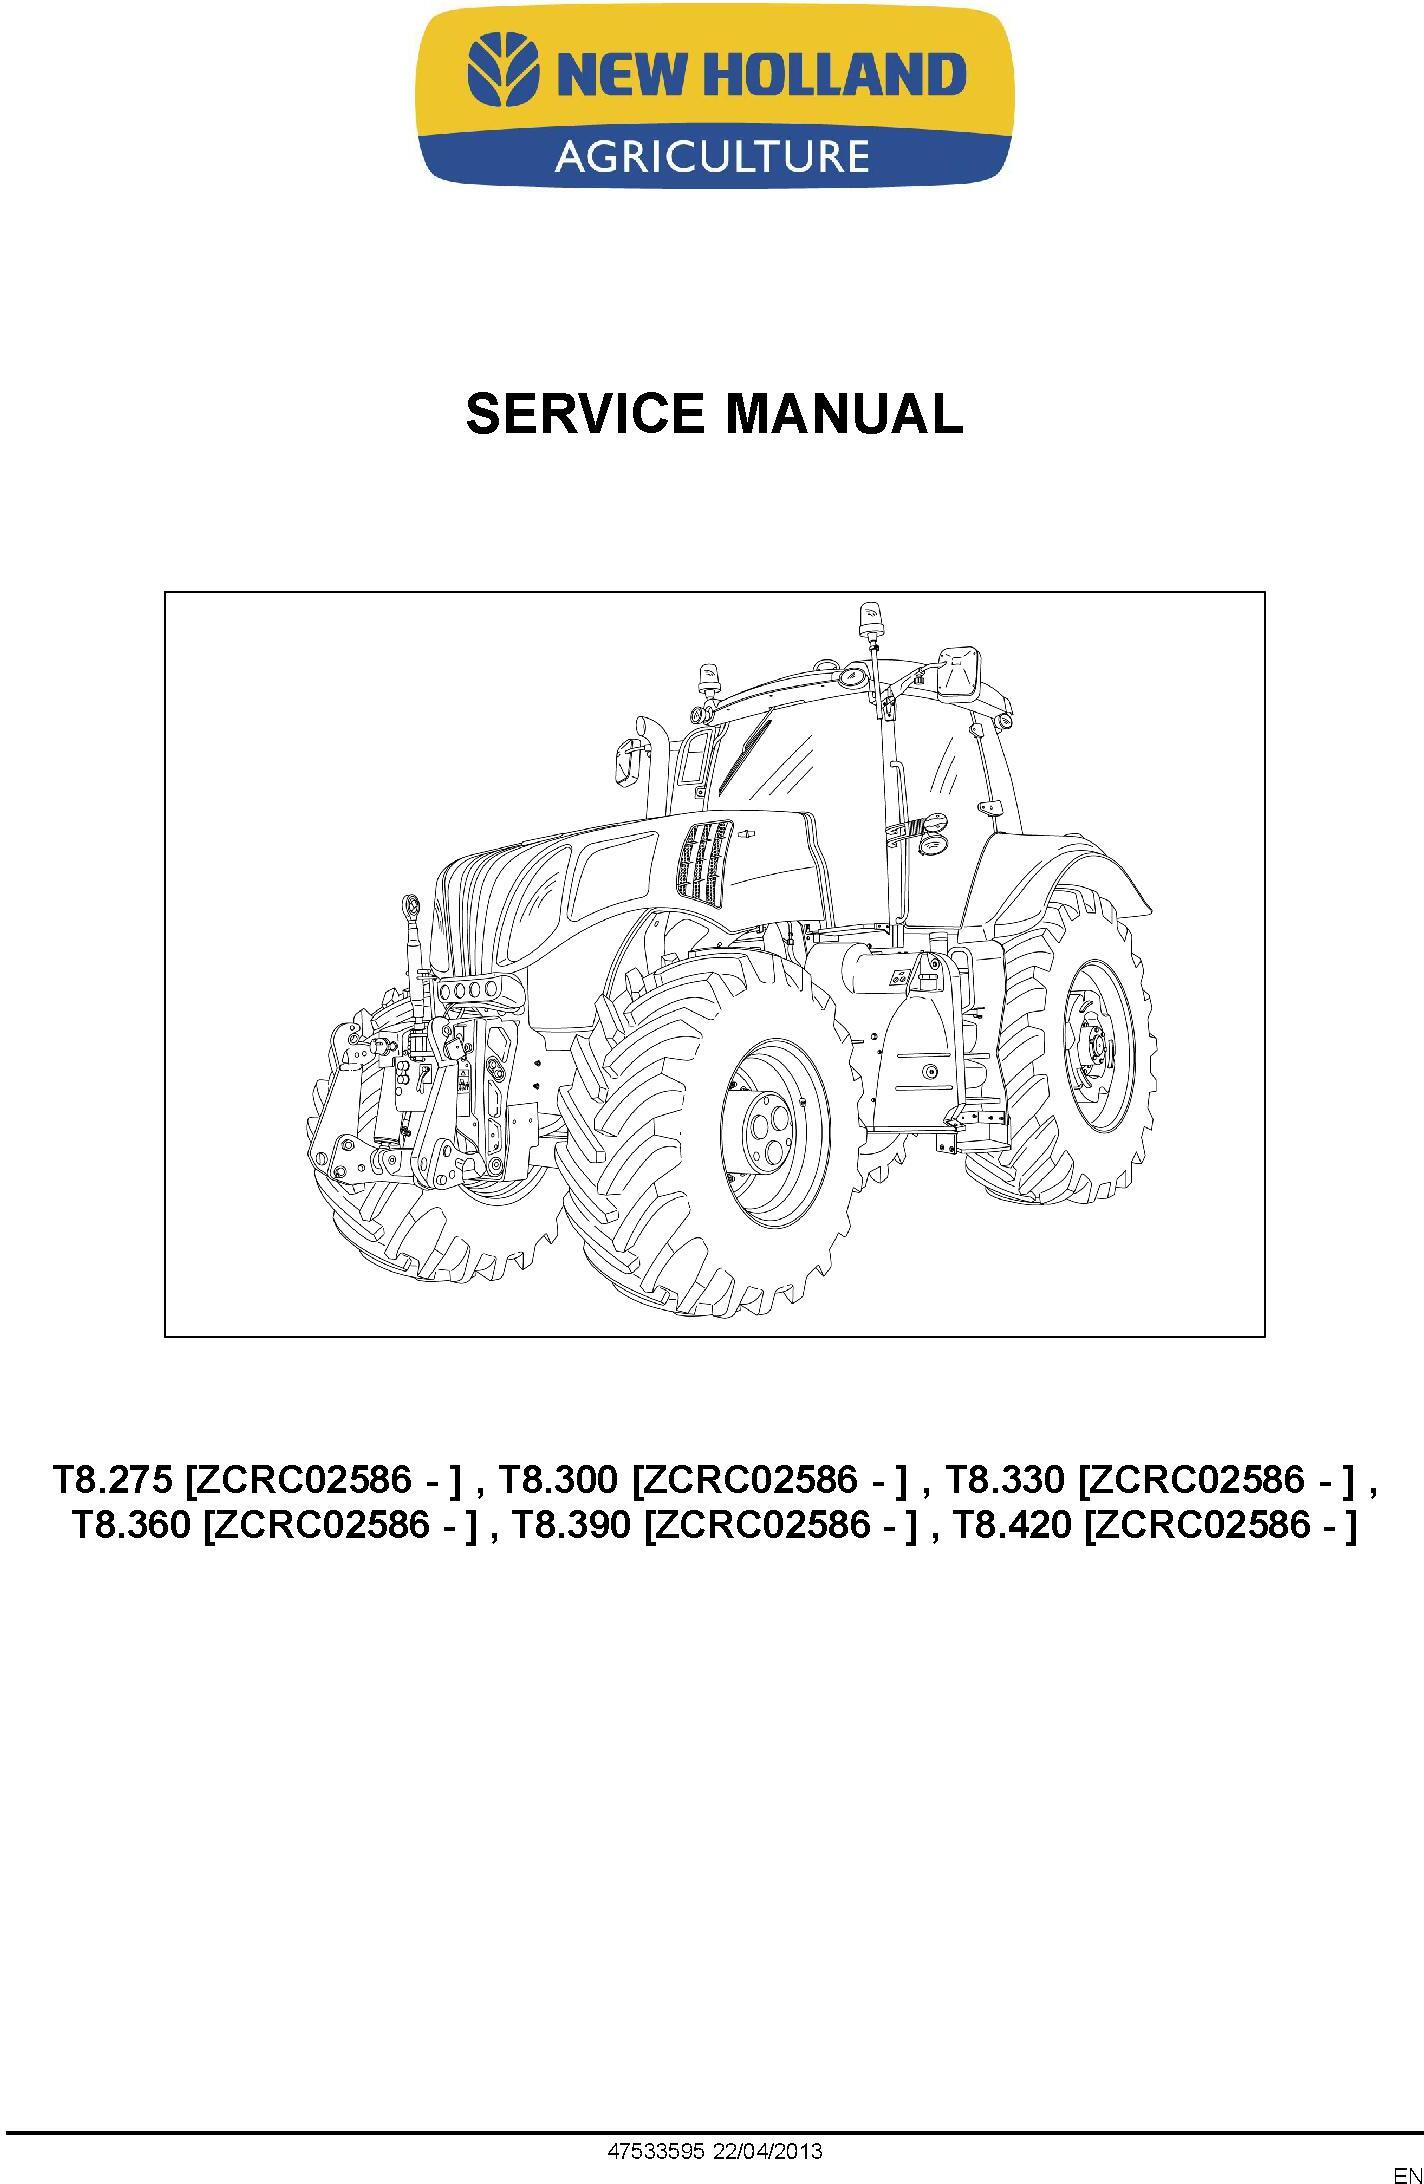 New Holland T8.275, T8.300, T8.330, T8.360, T8.390, T8.420 Tractor w.CVT Transmission Service Manual - 1